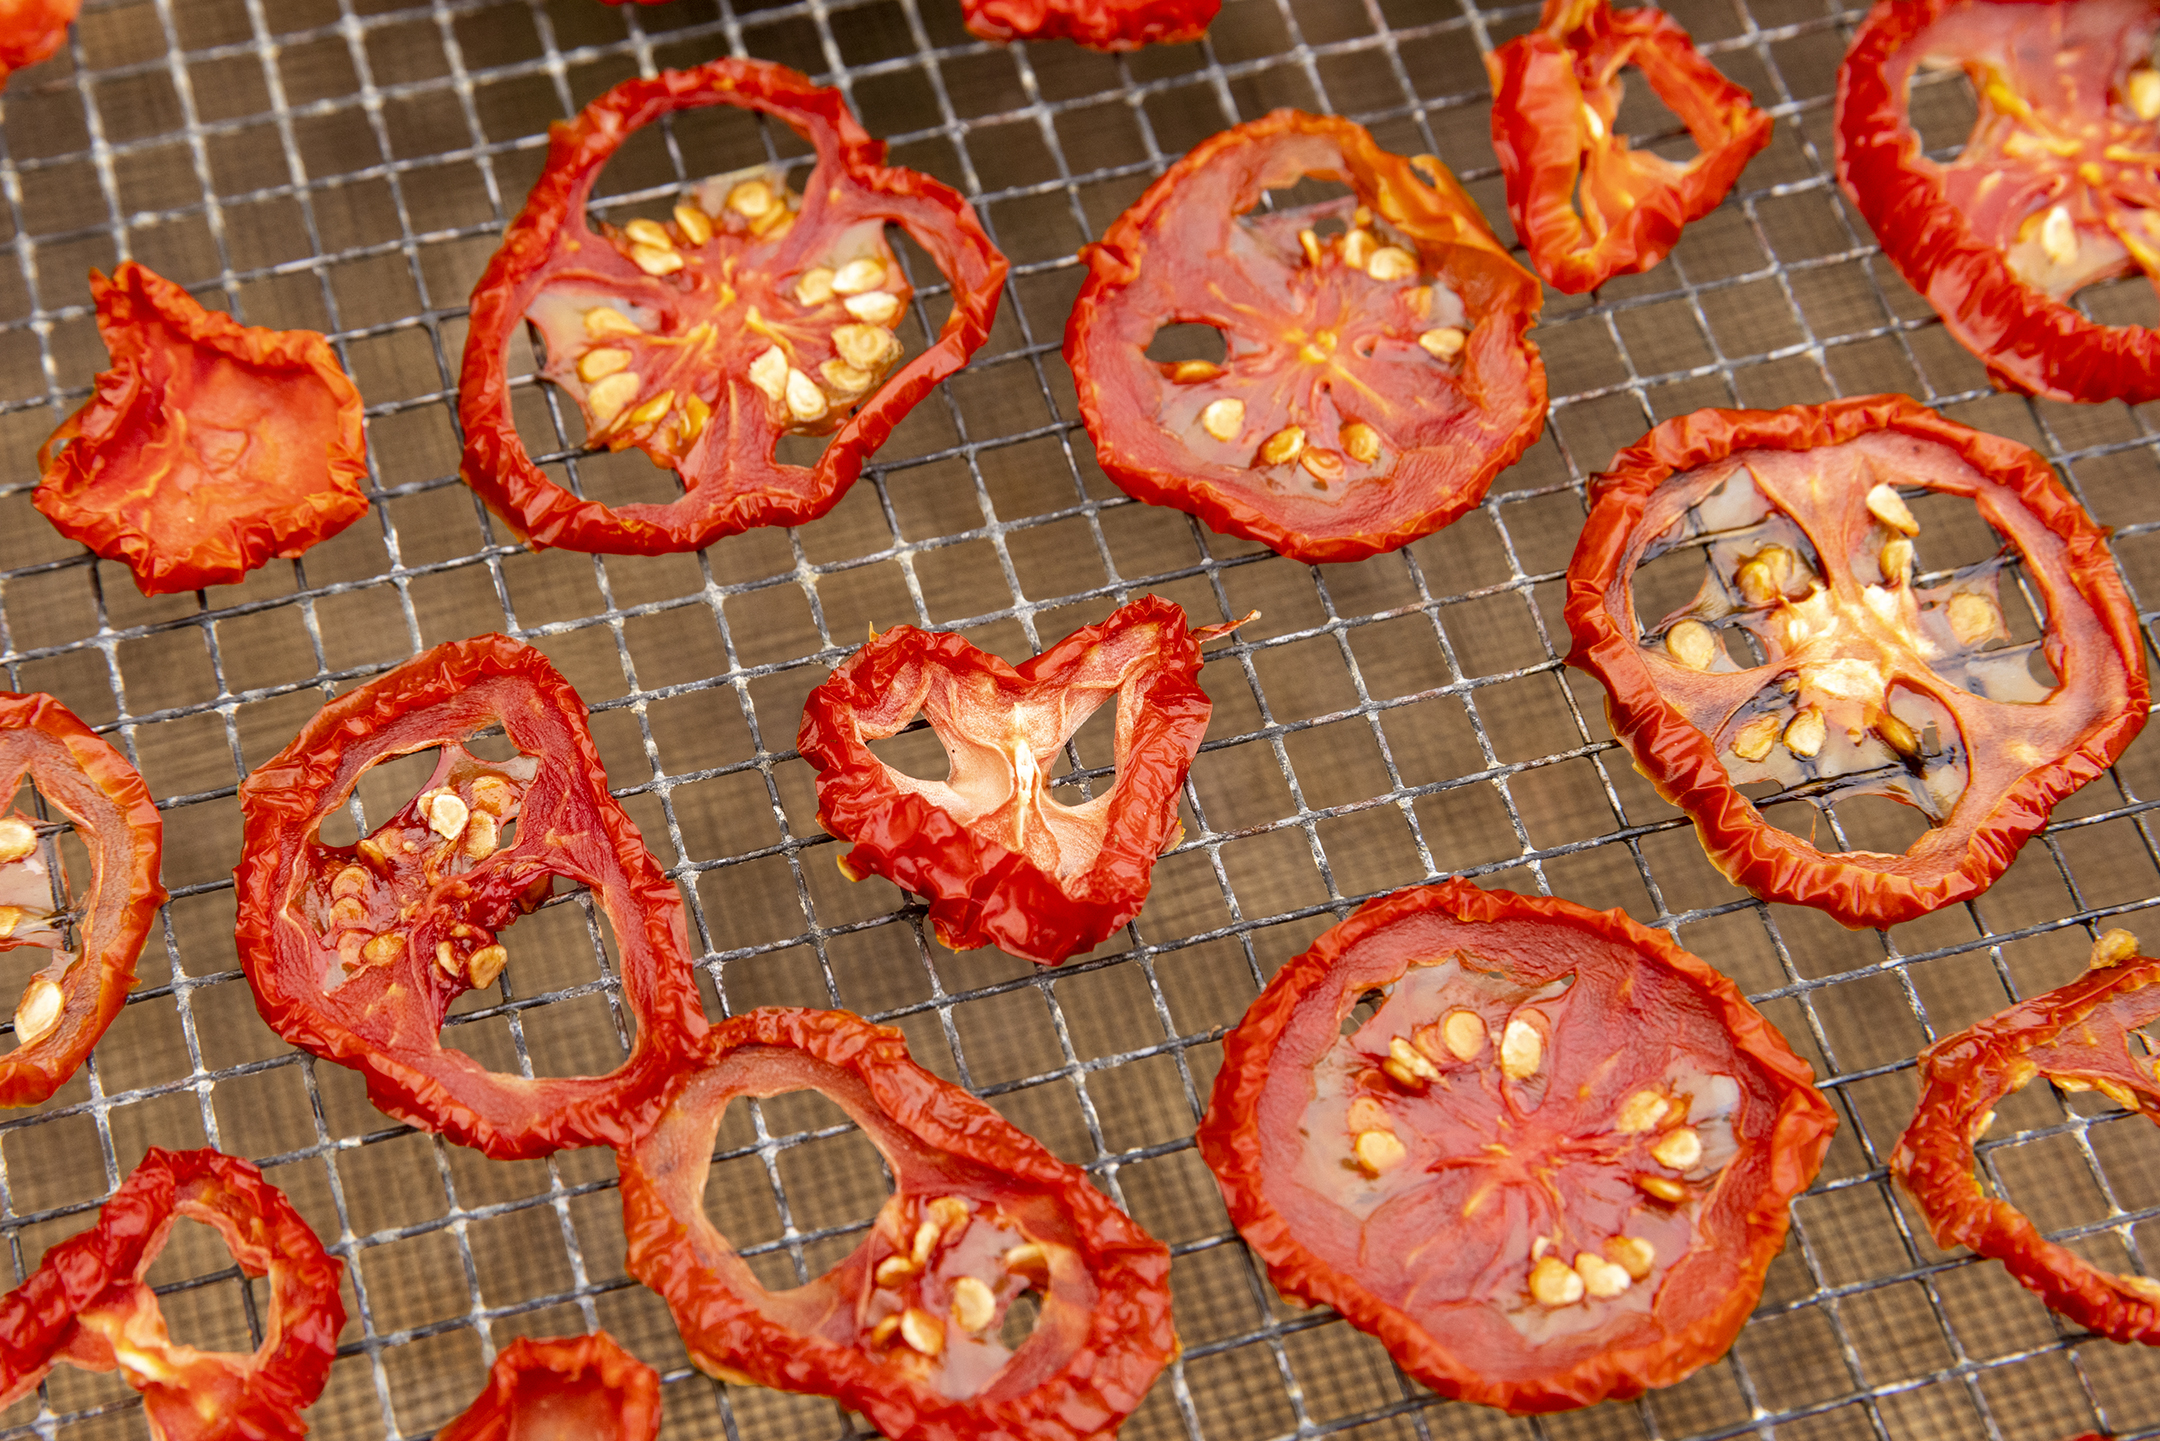 Sundried and Oven Roasted Tomatoes